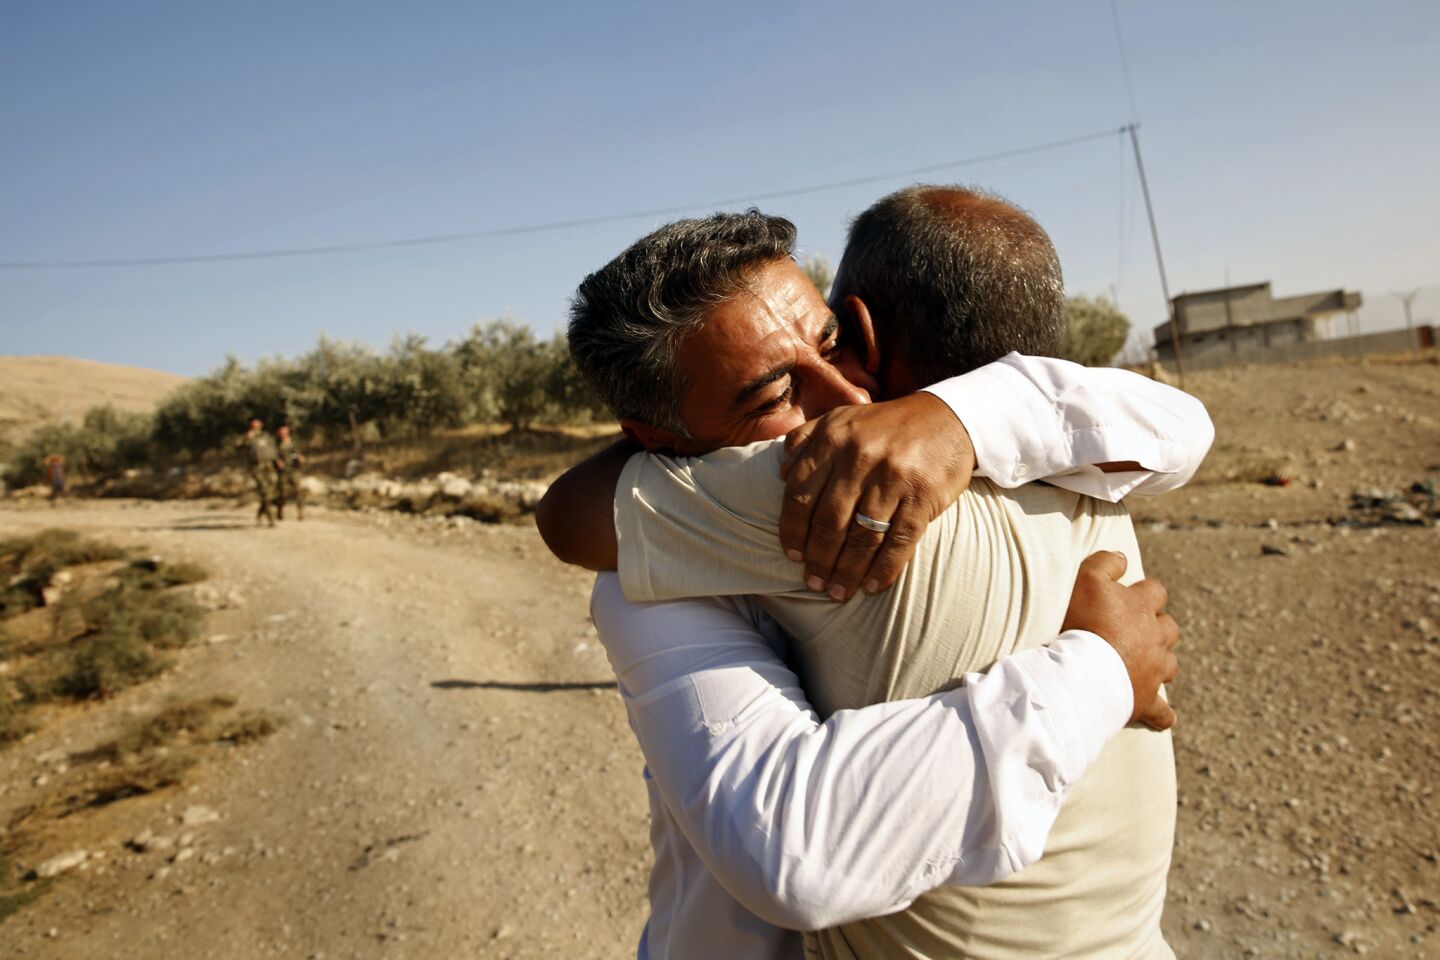 In the village of Faziliya, recently liberated from Islamic State, Abdul Gafur, 38, embraces his brother Mohammad Abdul Gafur, 40. The two had not seen each other since Islamic State forces took control of the village more than two years ealier.